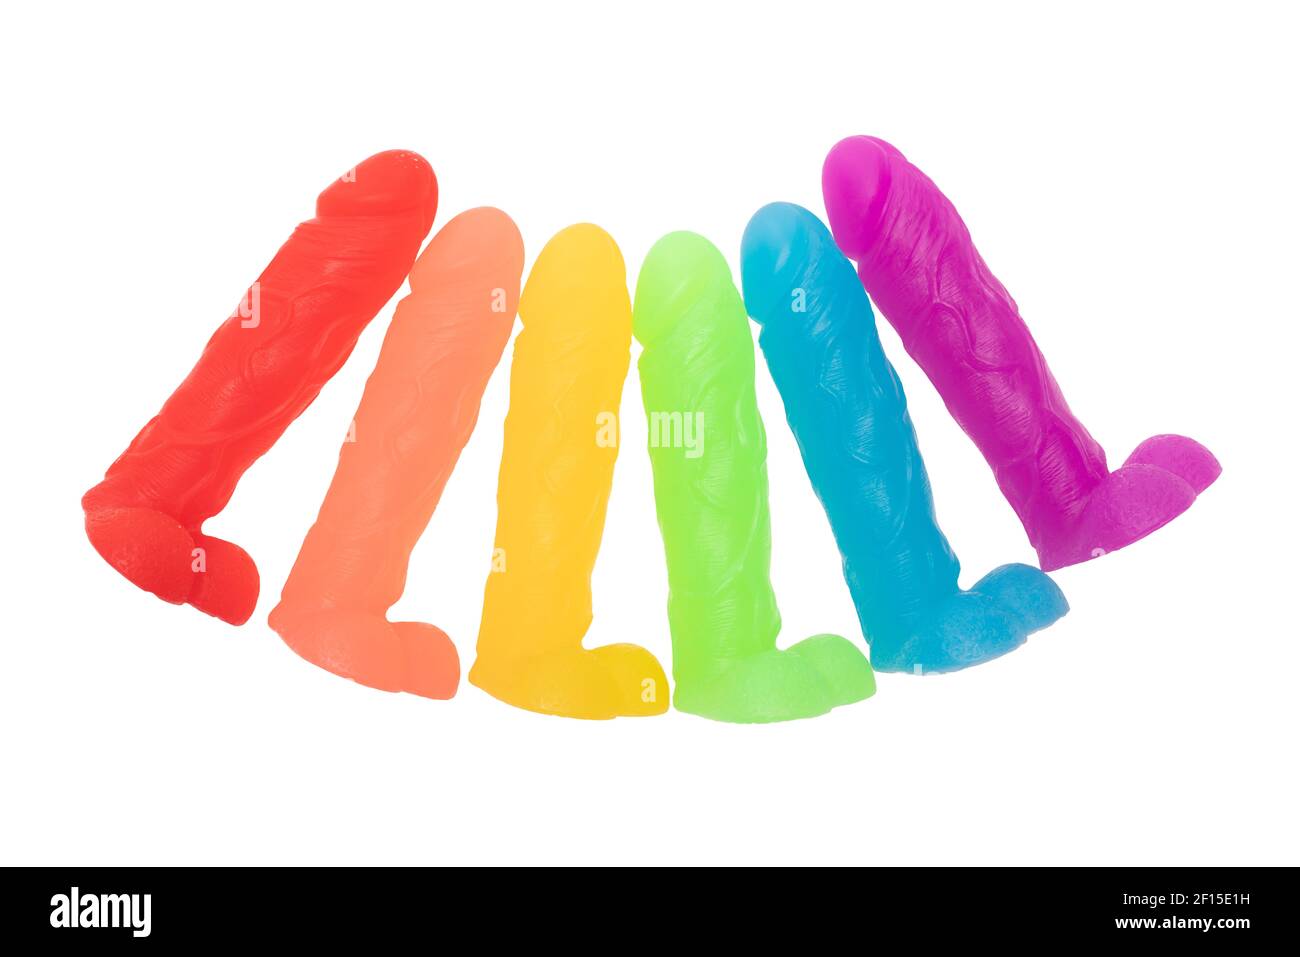 Row of soap dildos in rainbow colors Stock Photo